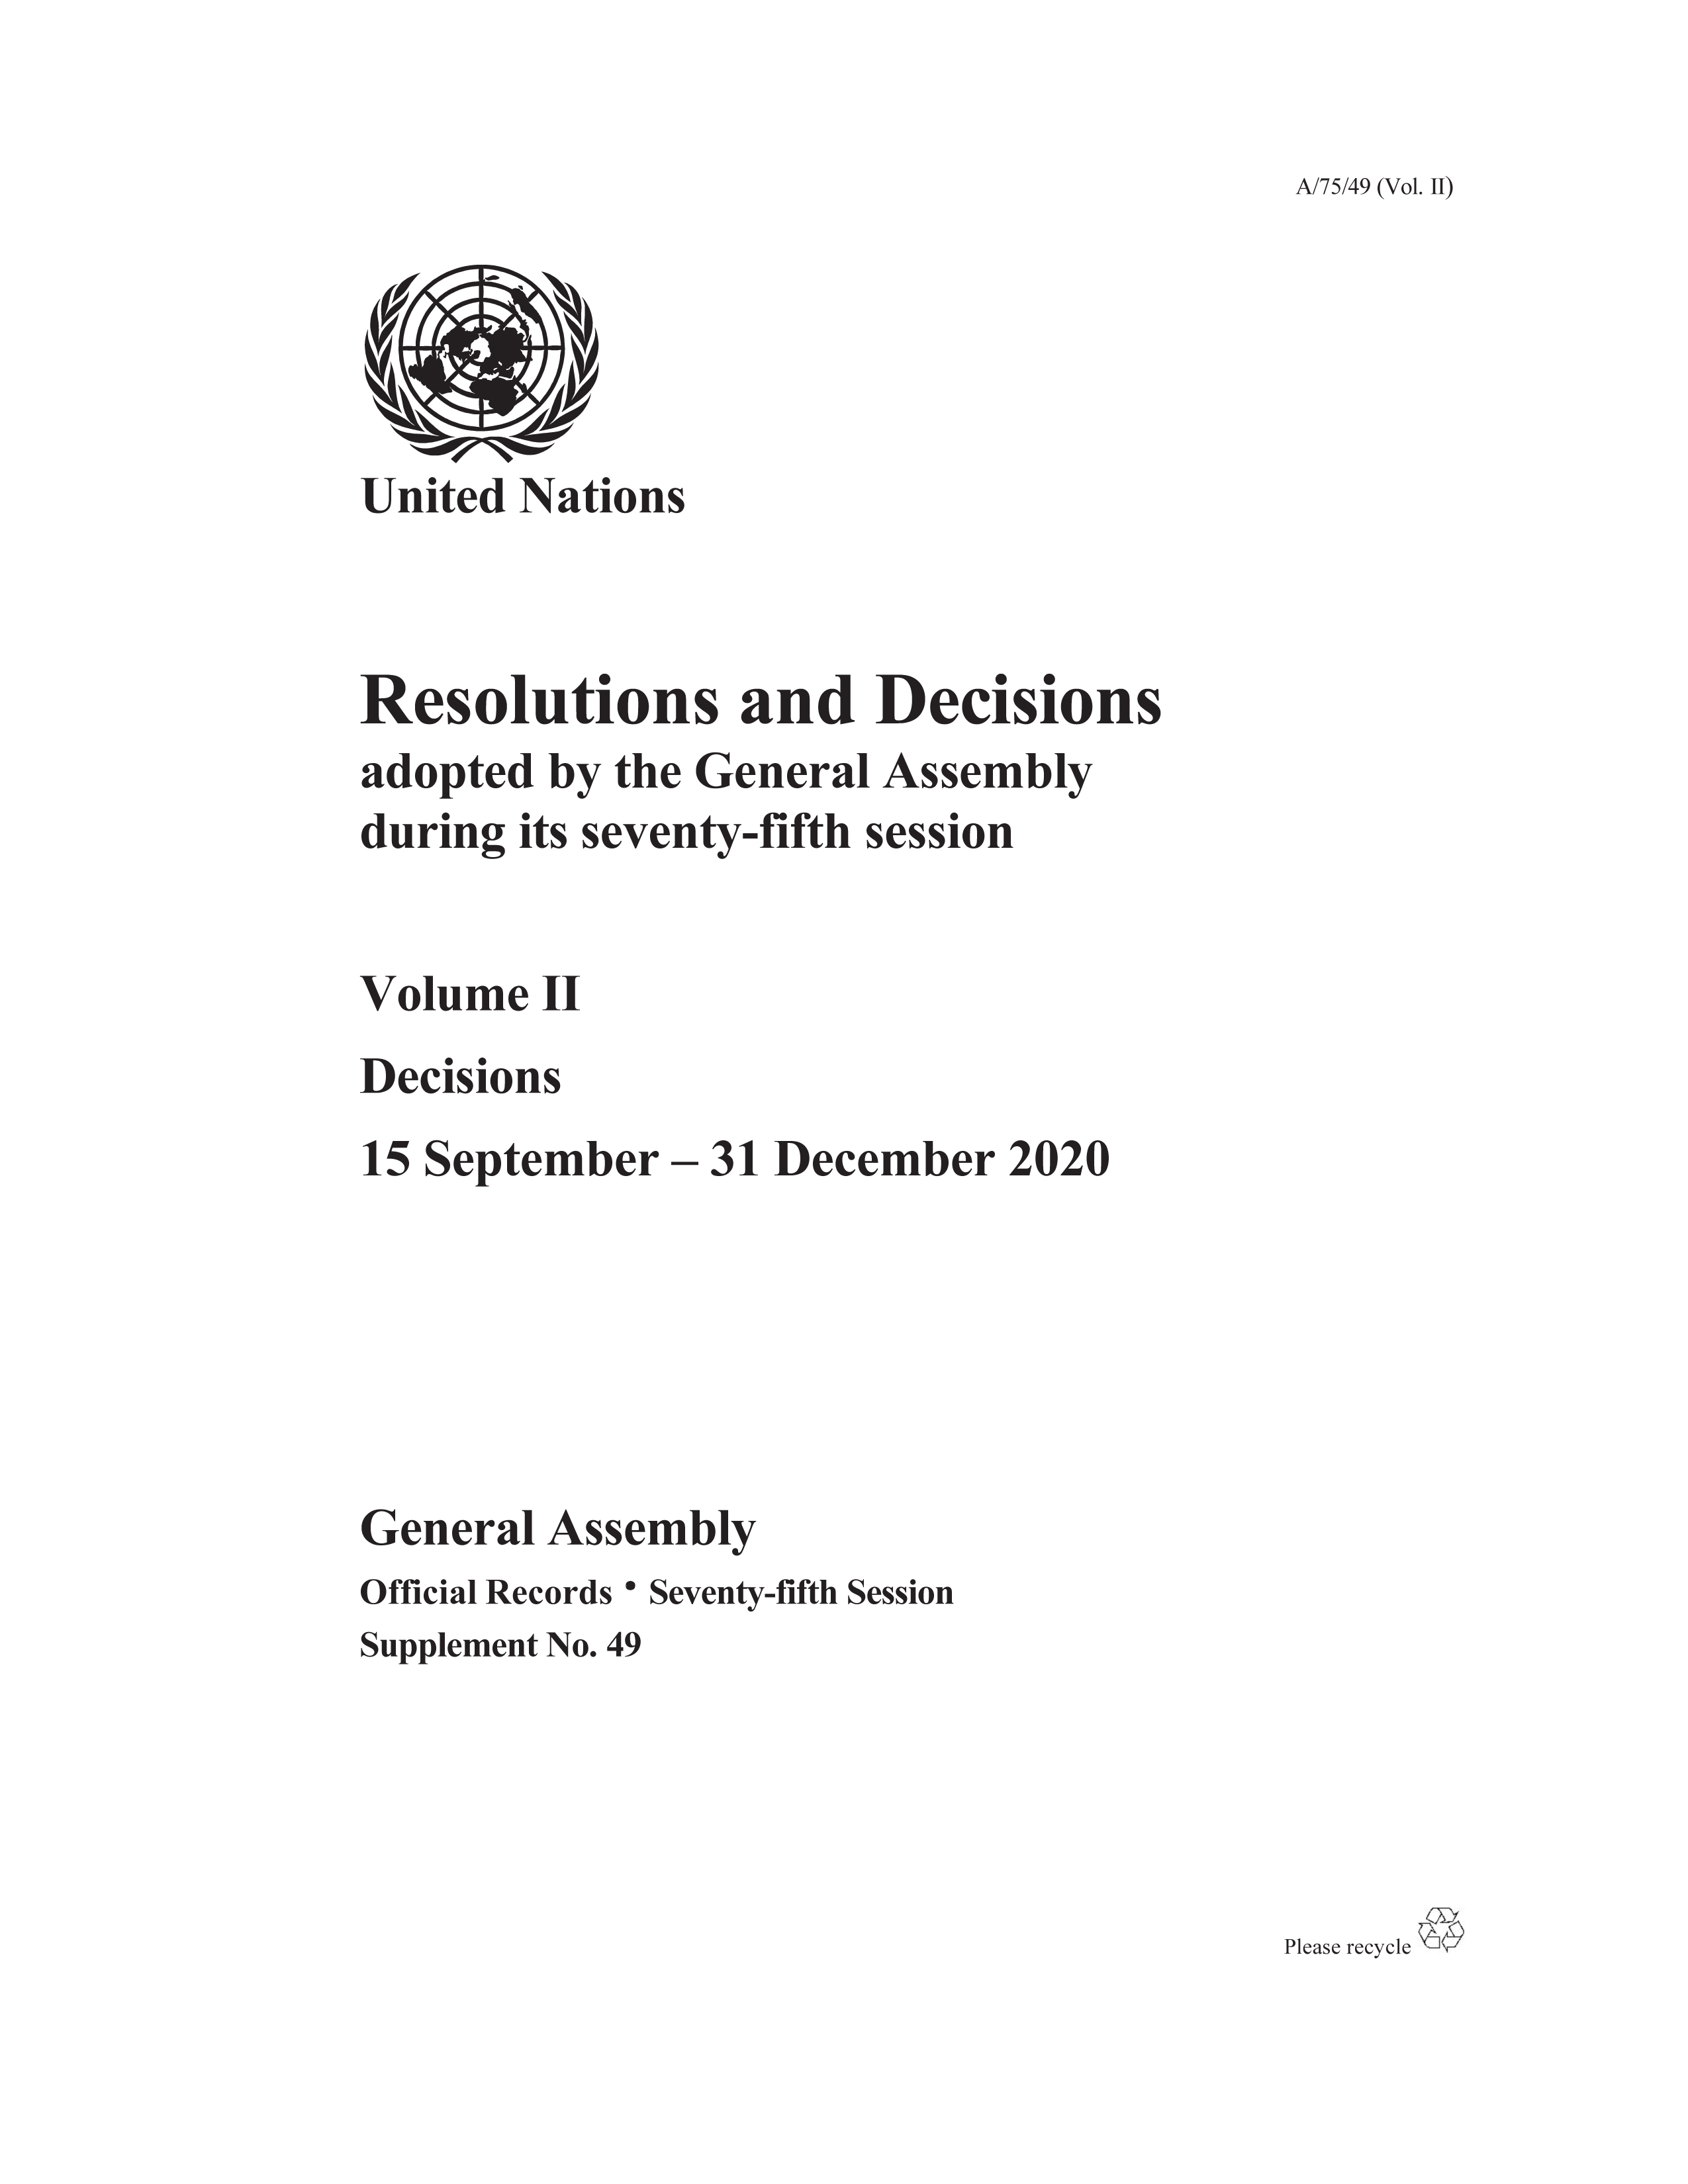 image of Resolutions and Decisions Adopted by the General Assembly During its Seventy-fifth Session: Volume II 